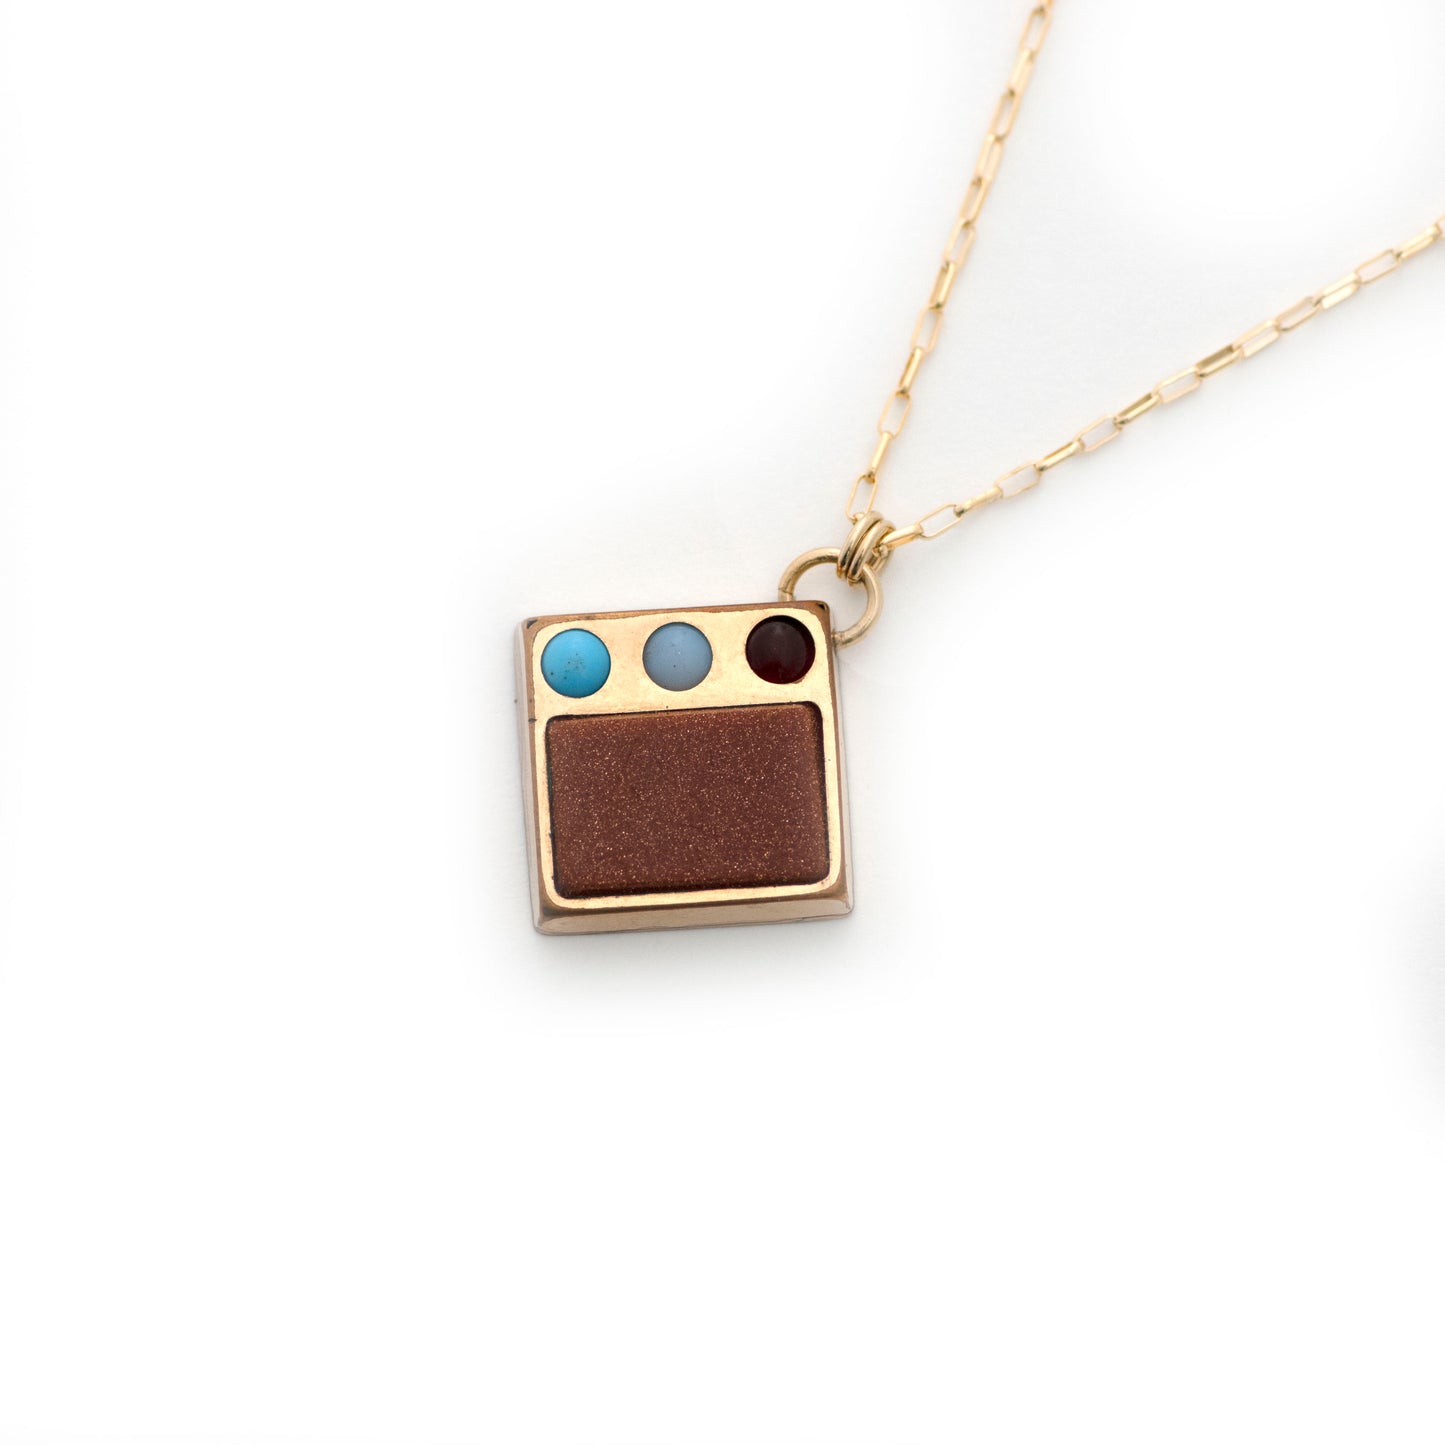 An antique gold filled Victorian cufflink conversion pendant with goldstone as well as red, white, and blue glass details. Cufflink conversion pendant necklace is laying on an all white background.